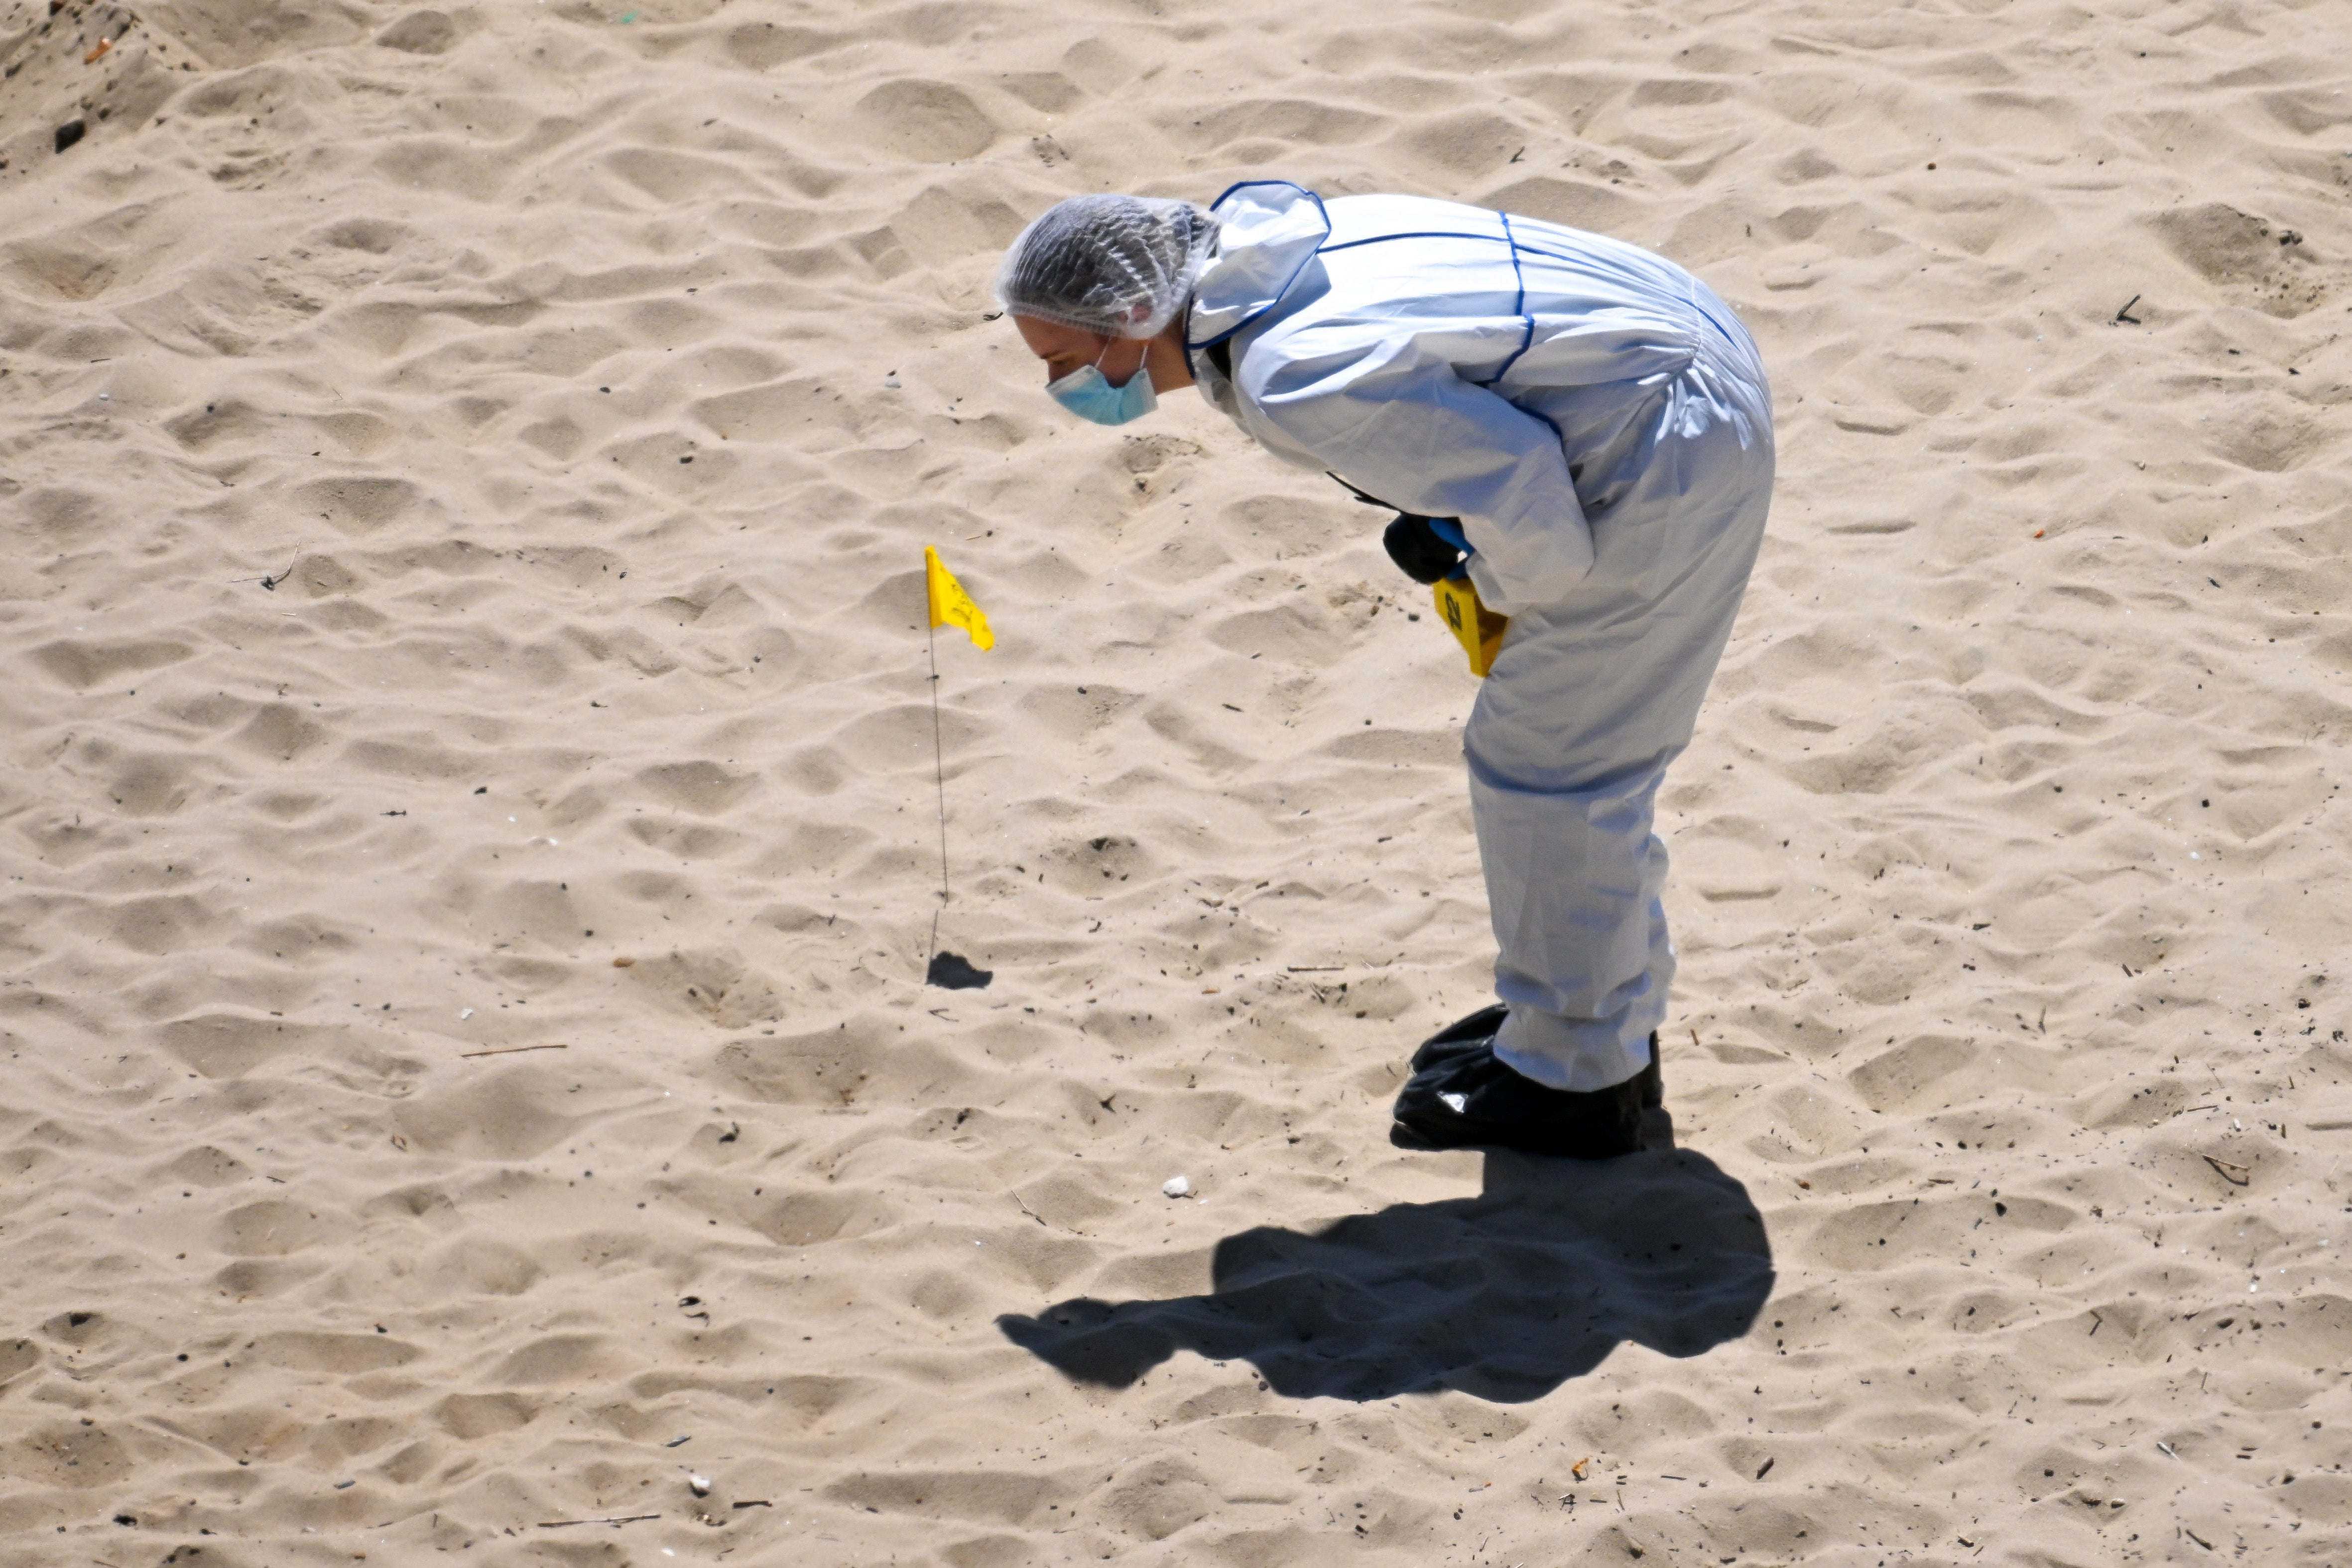 Forensic officers work at the scene of the double stabbing at Durley Chine Beach